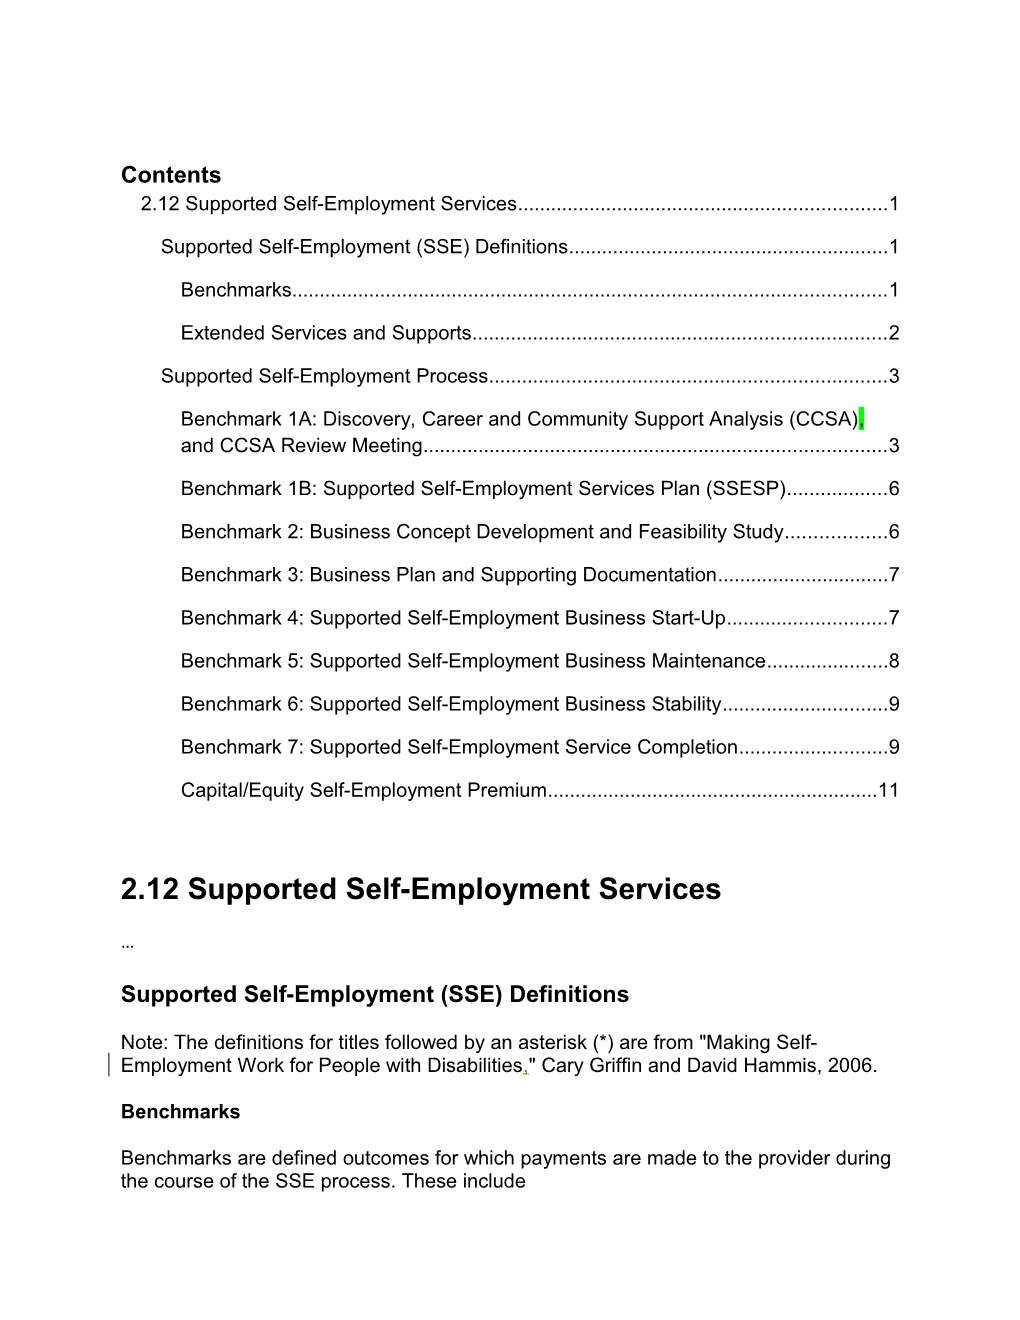 2.12 Supported Self-Employment Services 1